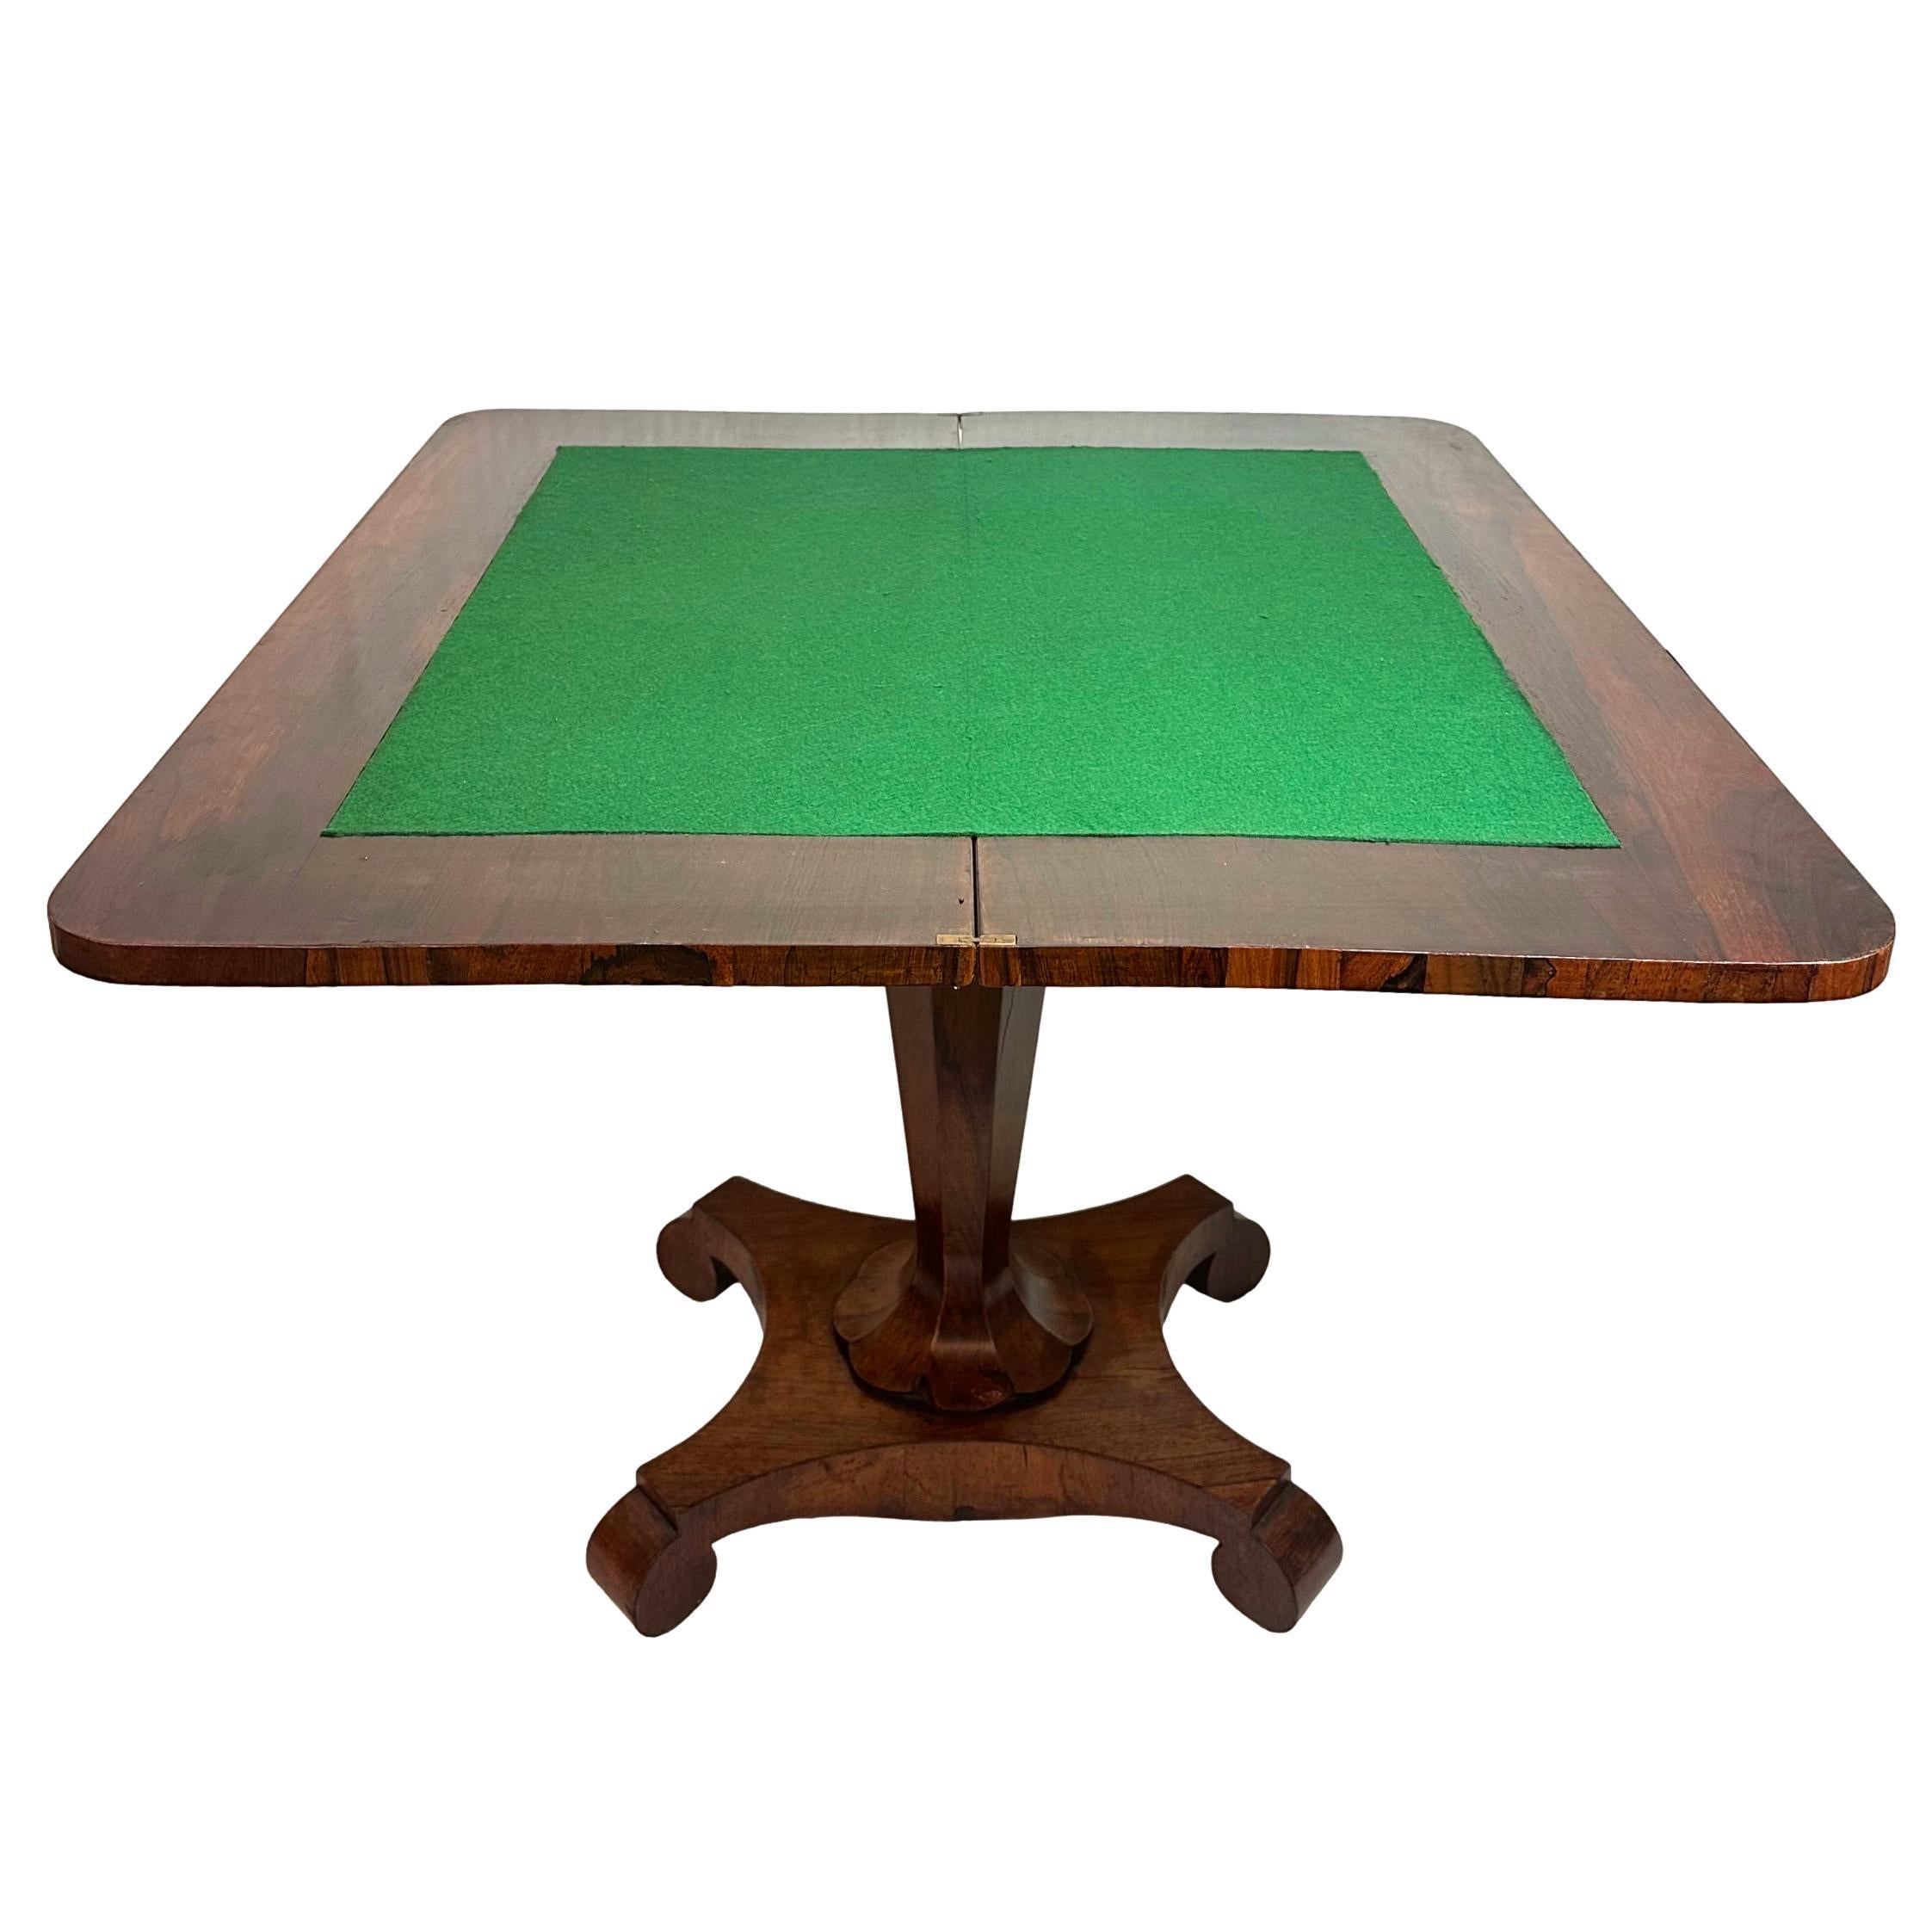 An Antique William IV Rosewood Period Card Table & Side Table, English, ca. 1835 For Sale 3